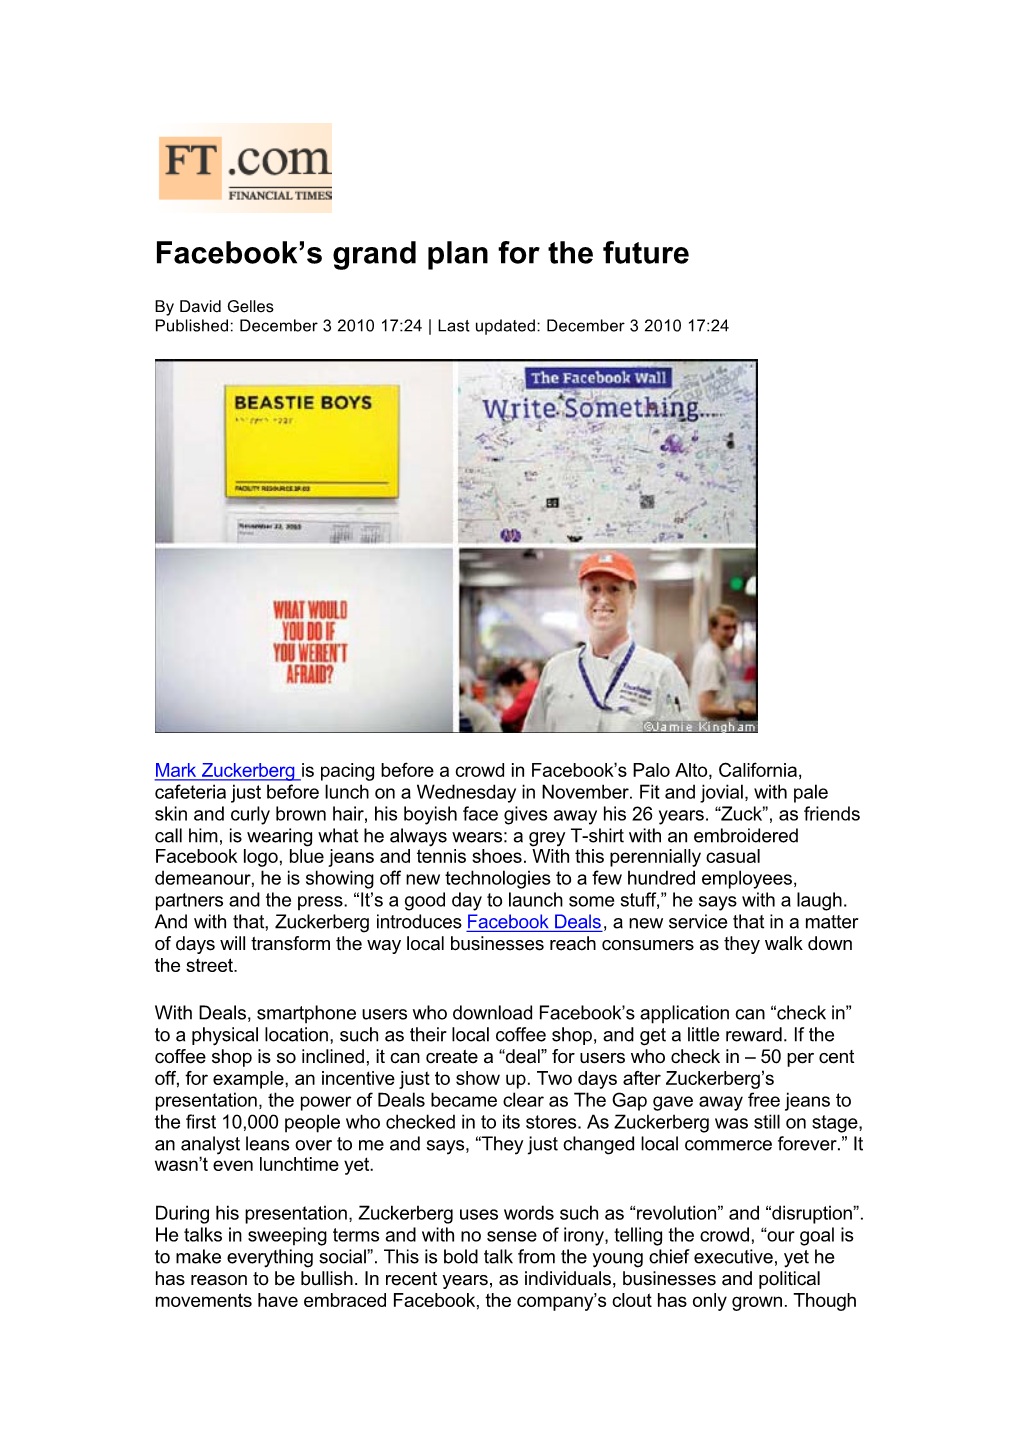 Facebook's Grand Plan for the Future